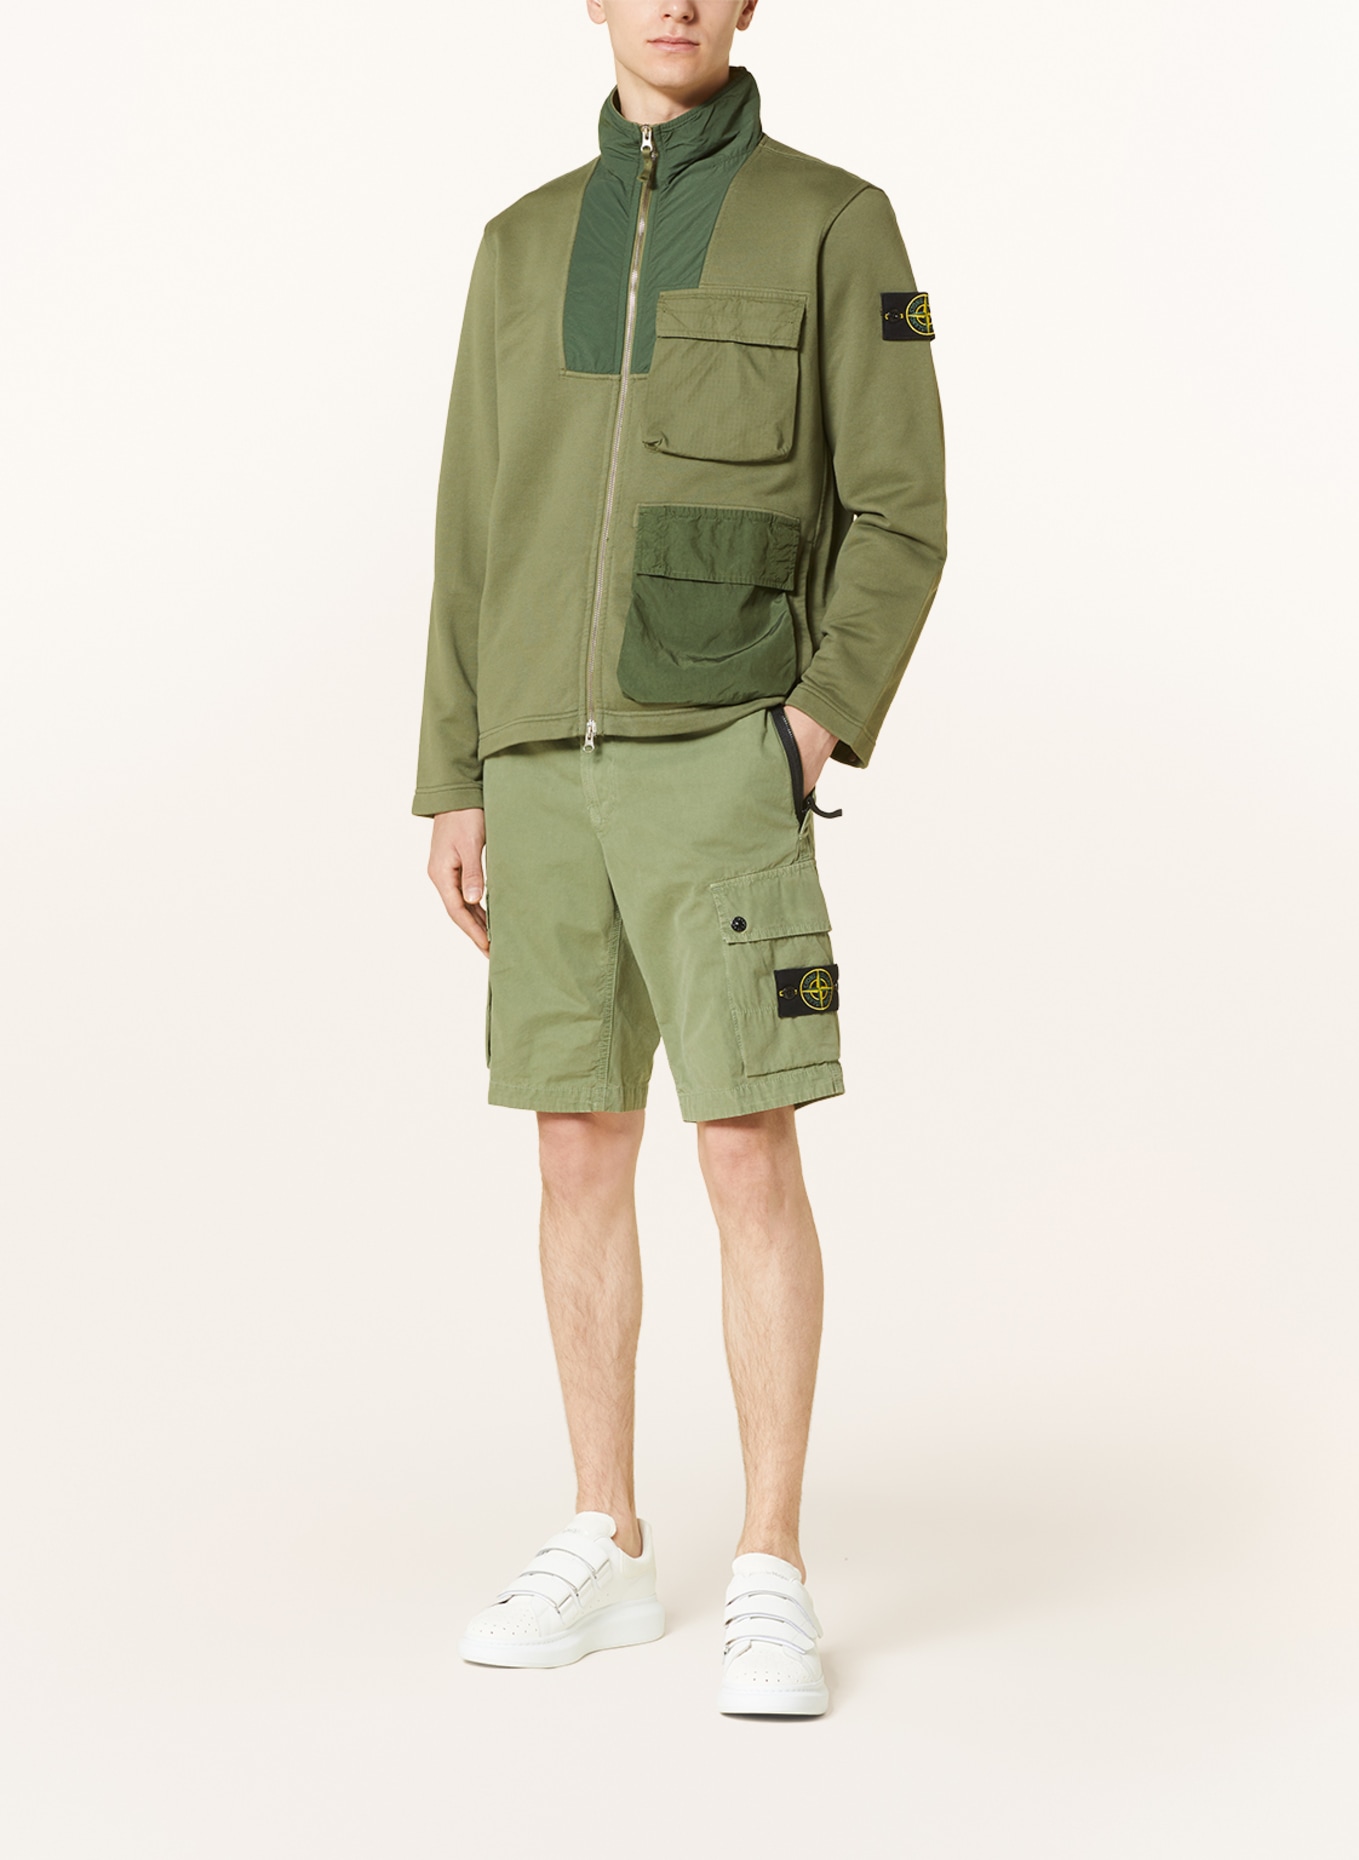 STONE ISLAND Sweat jacket in mixed materials, Color: GREEN (Image 2)